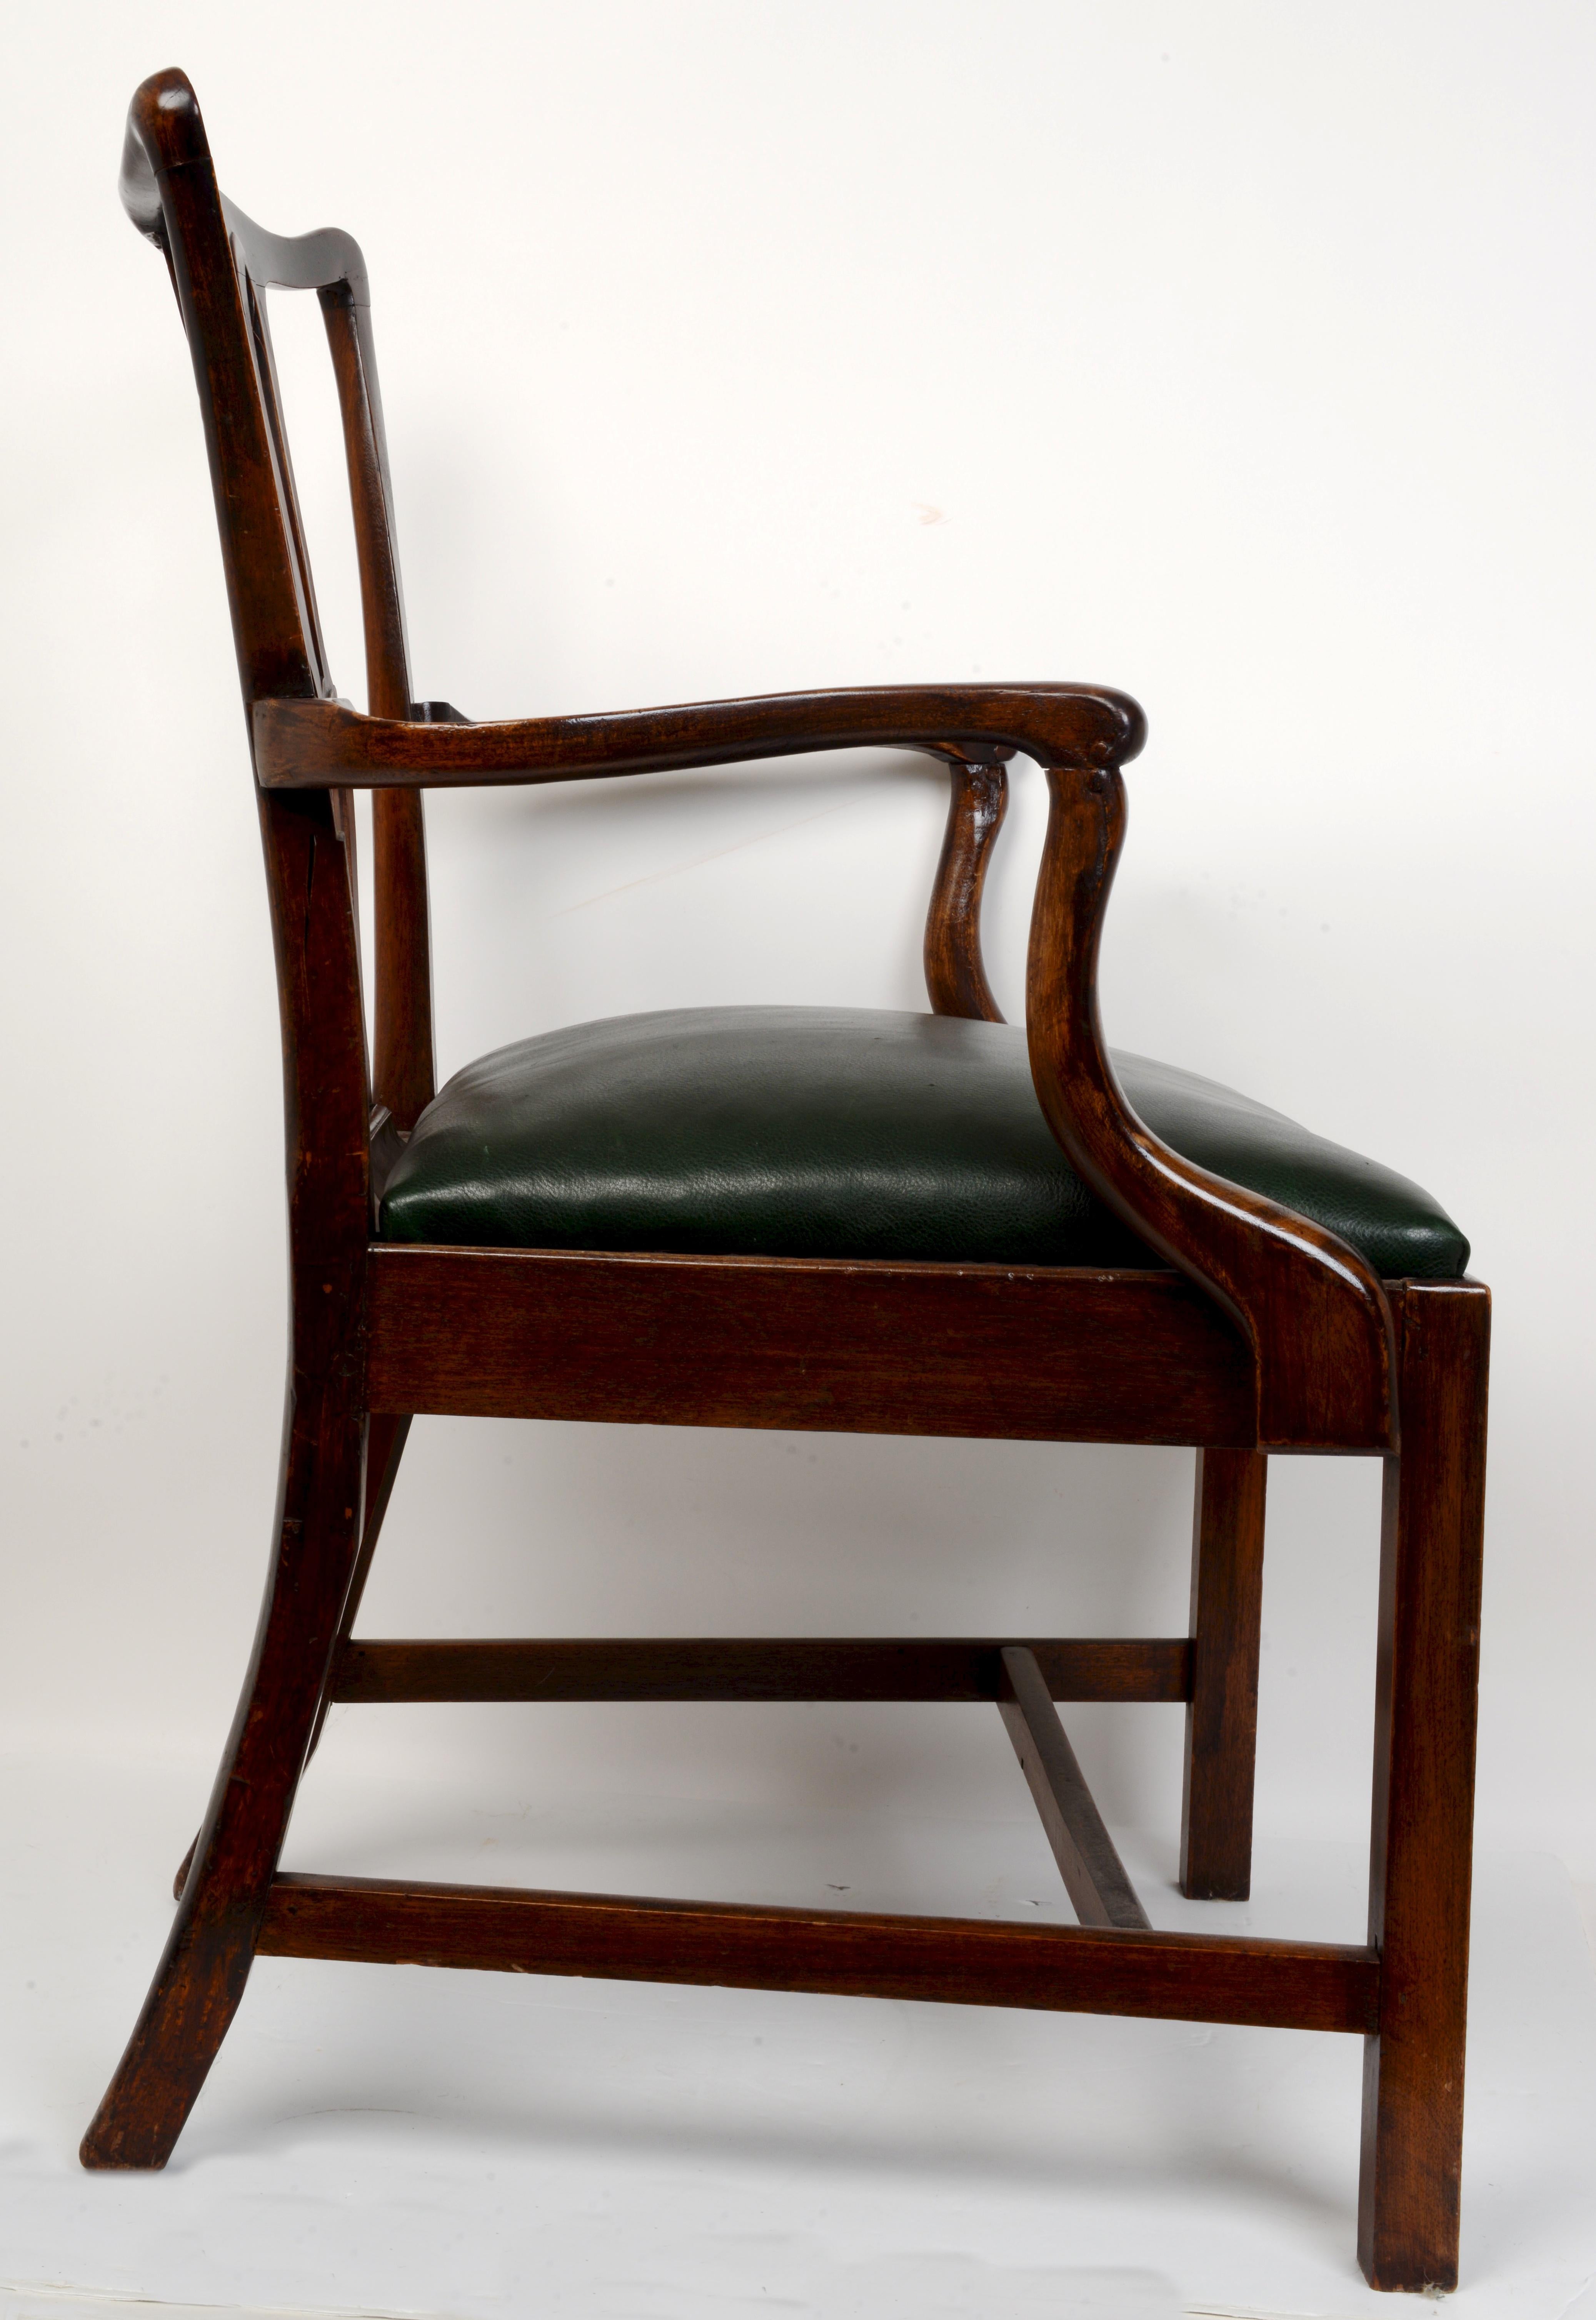 Geo III Style open arm chair, 19th. The carved mahogany armchair in the Thomas Chippendale 'Gothick' manner with a serpentine topped rail above a pierced splat. The top rail has continuous carving completing the arched, bulbous designed backrest. It